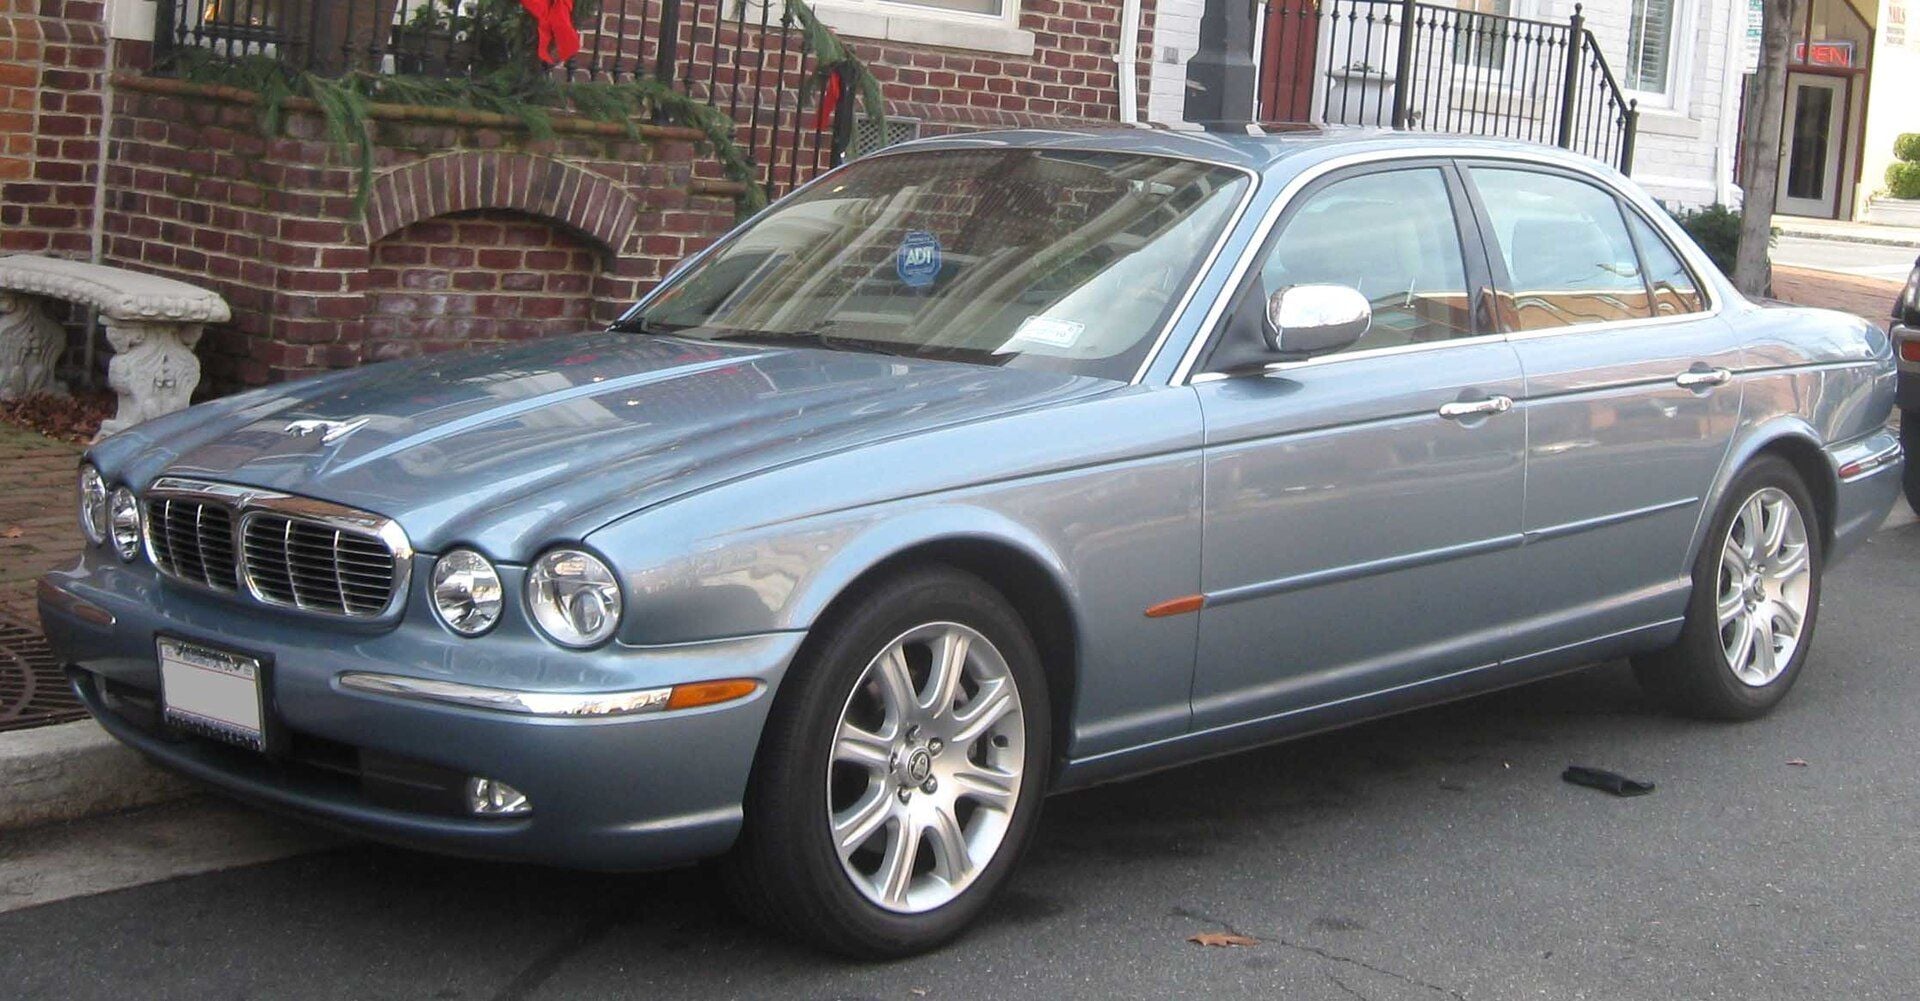 Exterior Body Parts - X350 valance Panel wanted - Used - 2004 to 2007 Jaguar XJ - Quebec, QC A1L 2P, Canada